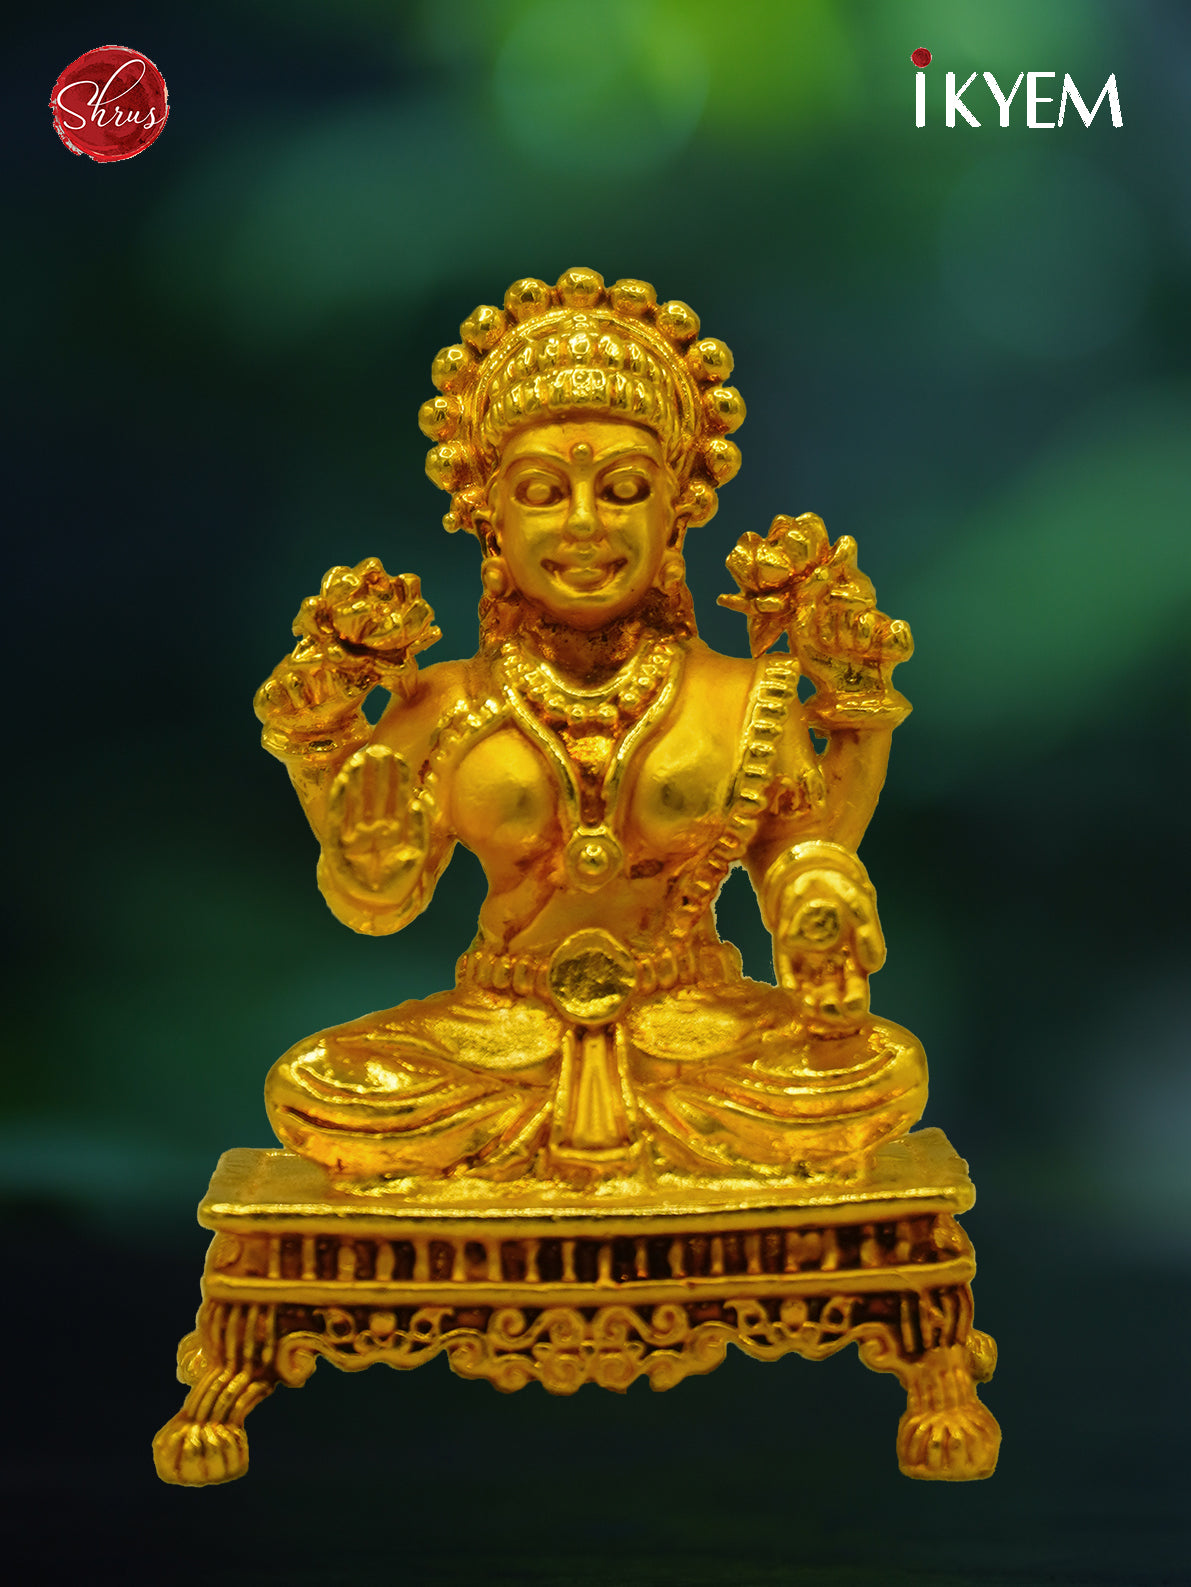 24 KT Gold Coated On Copper - Finely Crafted feature rich aadi Lakshmi